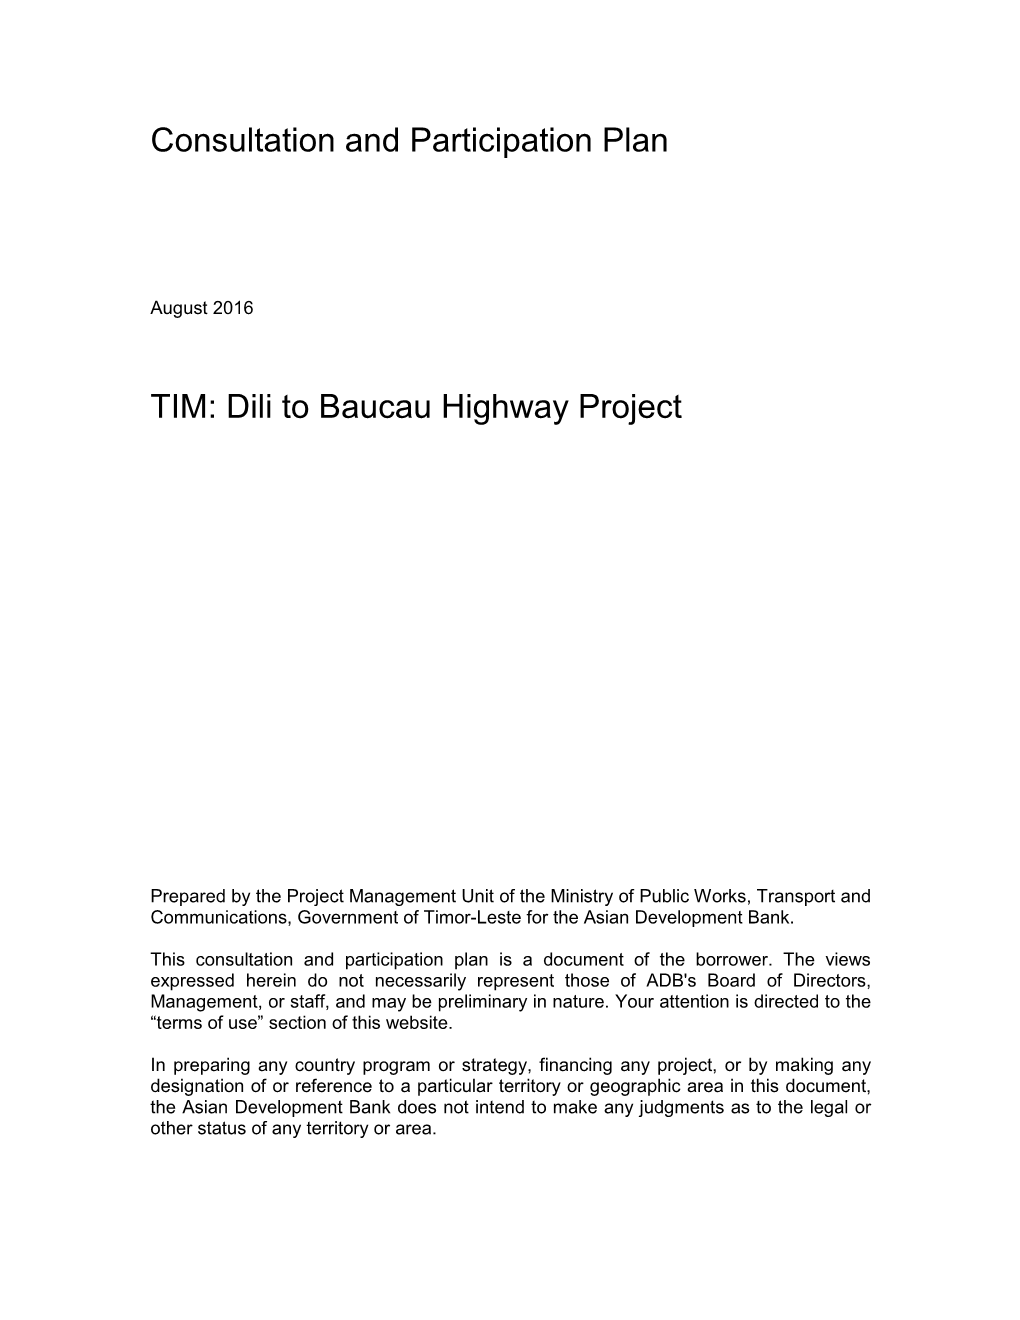 Consultation and Participation Plan TIM: Dili to Baucau Highway Project